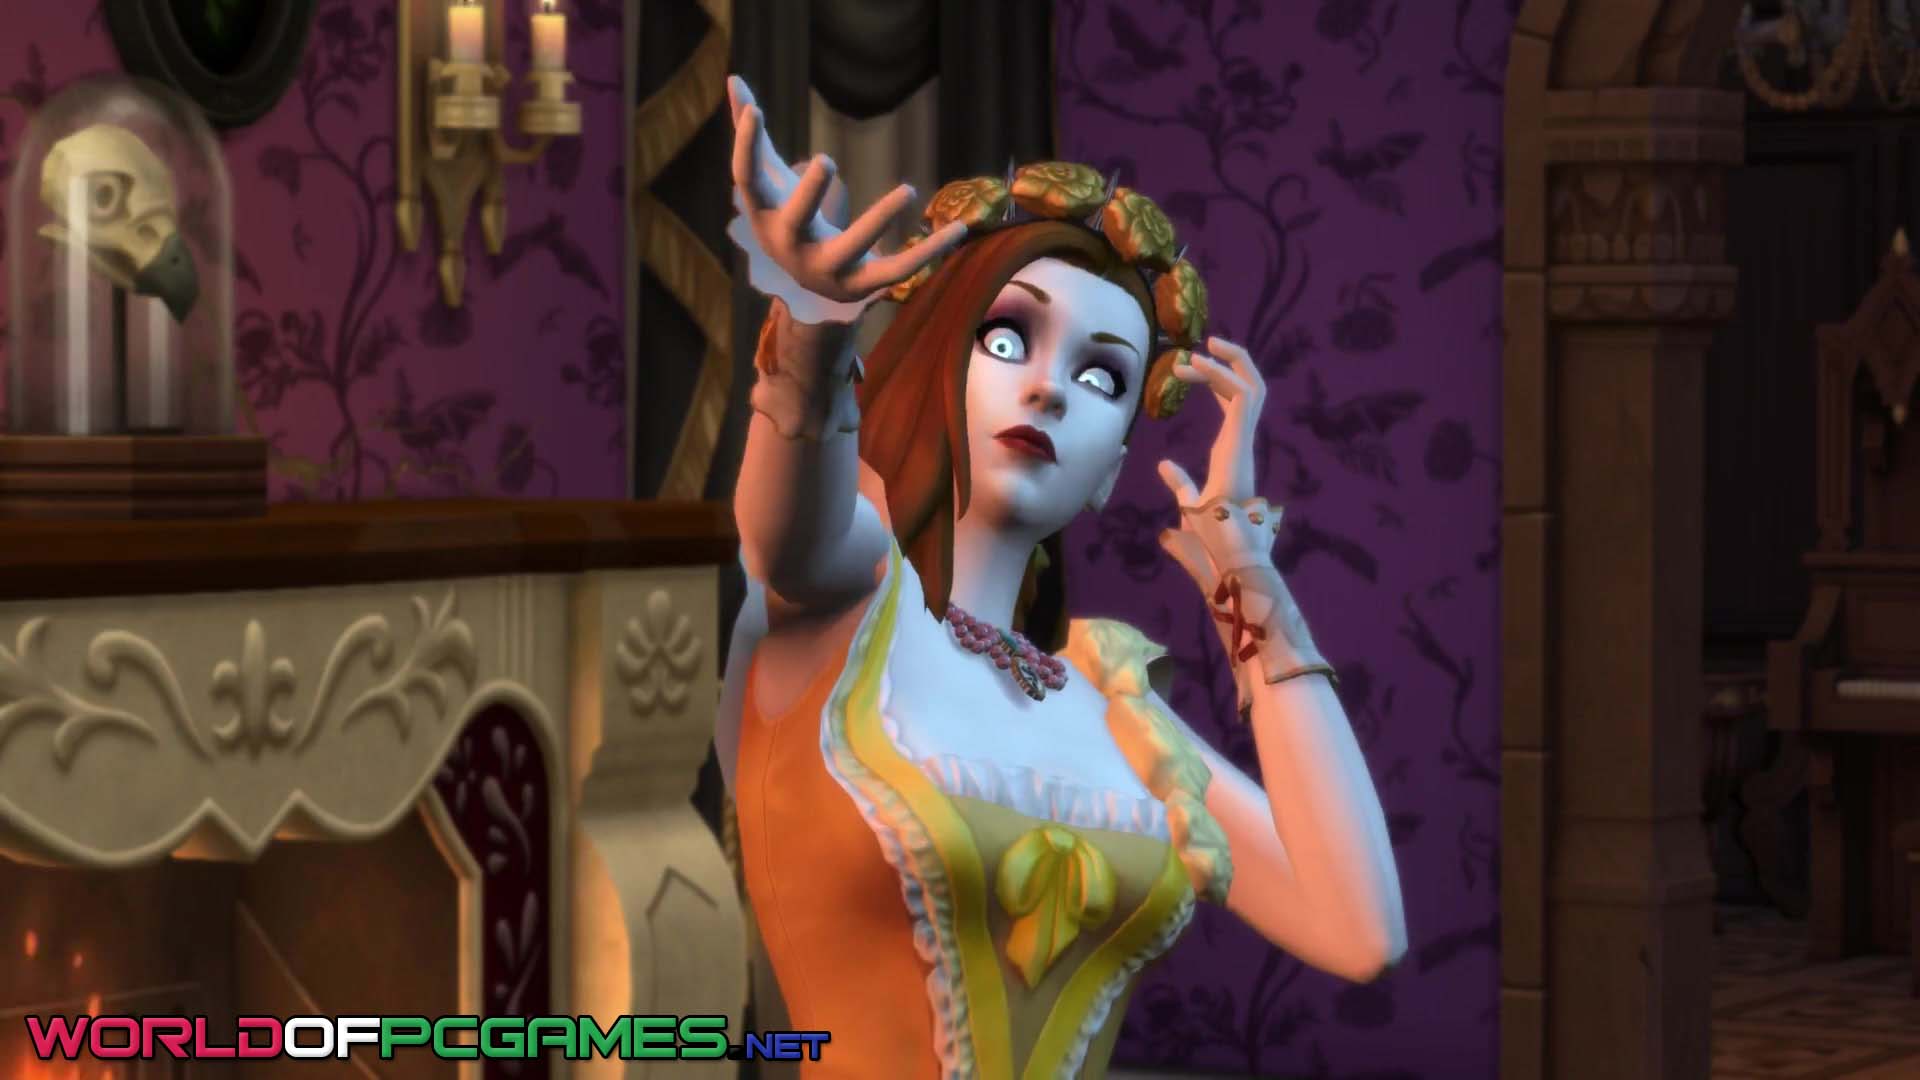 The SIMS 4 Vampires Free Download By worldof-pcgames.net